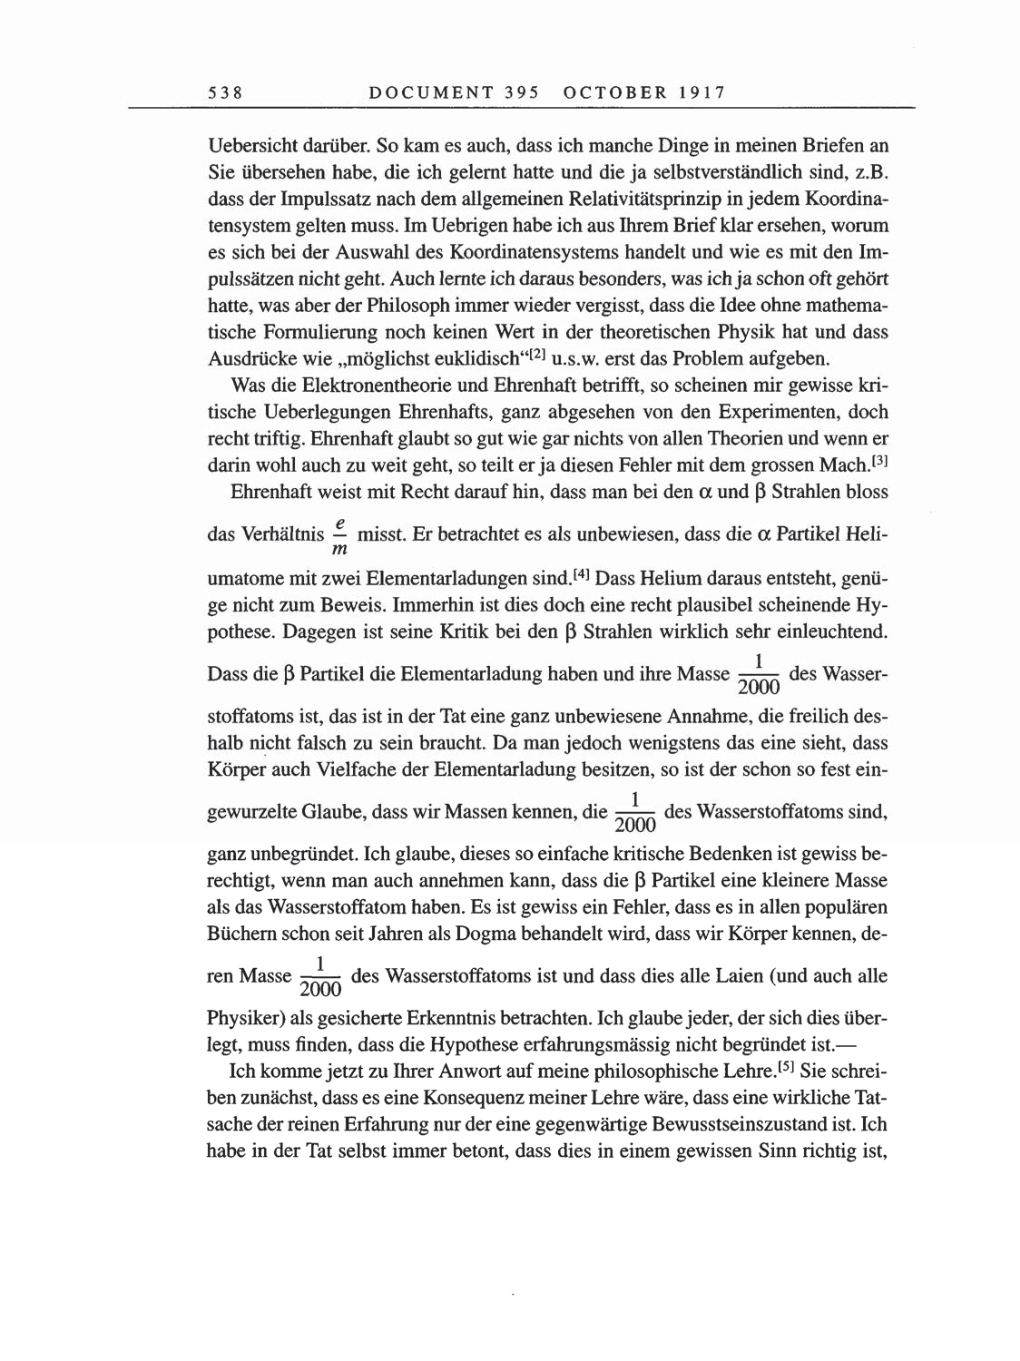 Volume 8, Part A: The Berlin Years: Correspondence 1914-1917 page 538